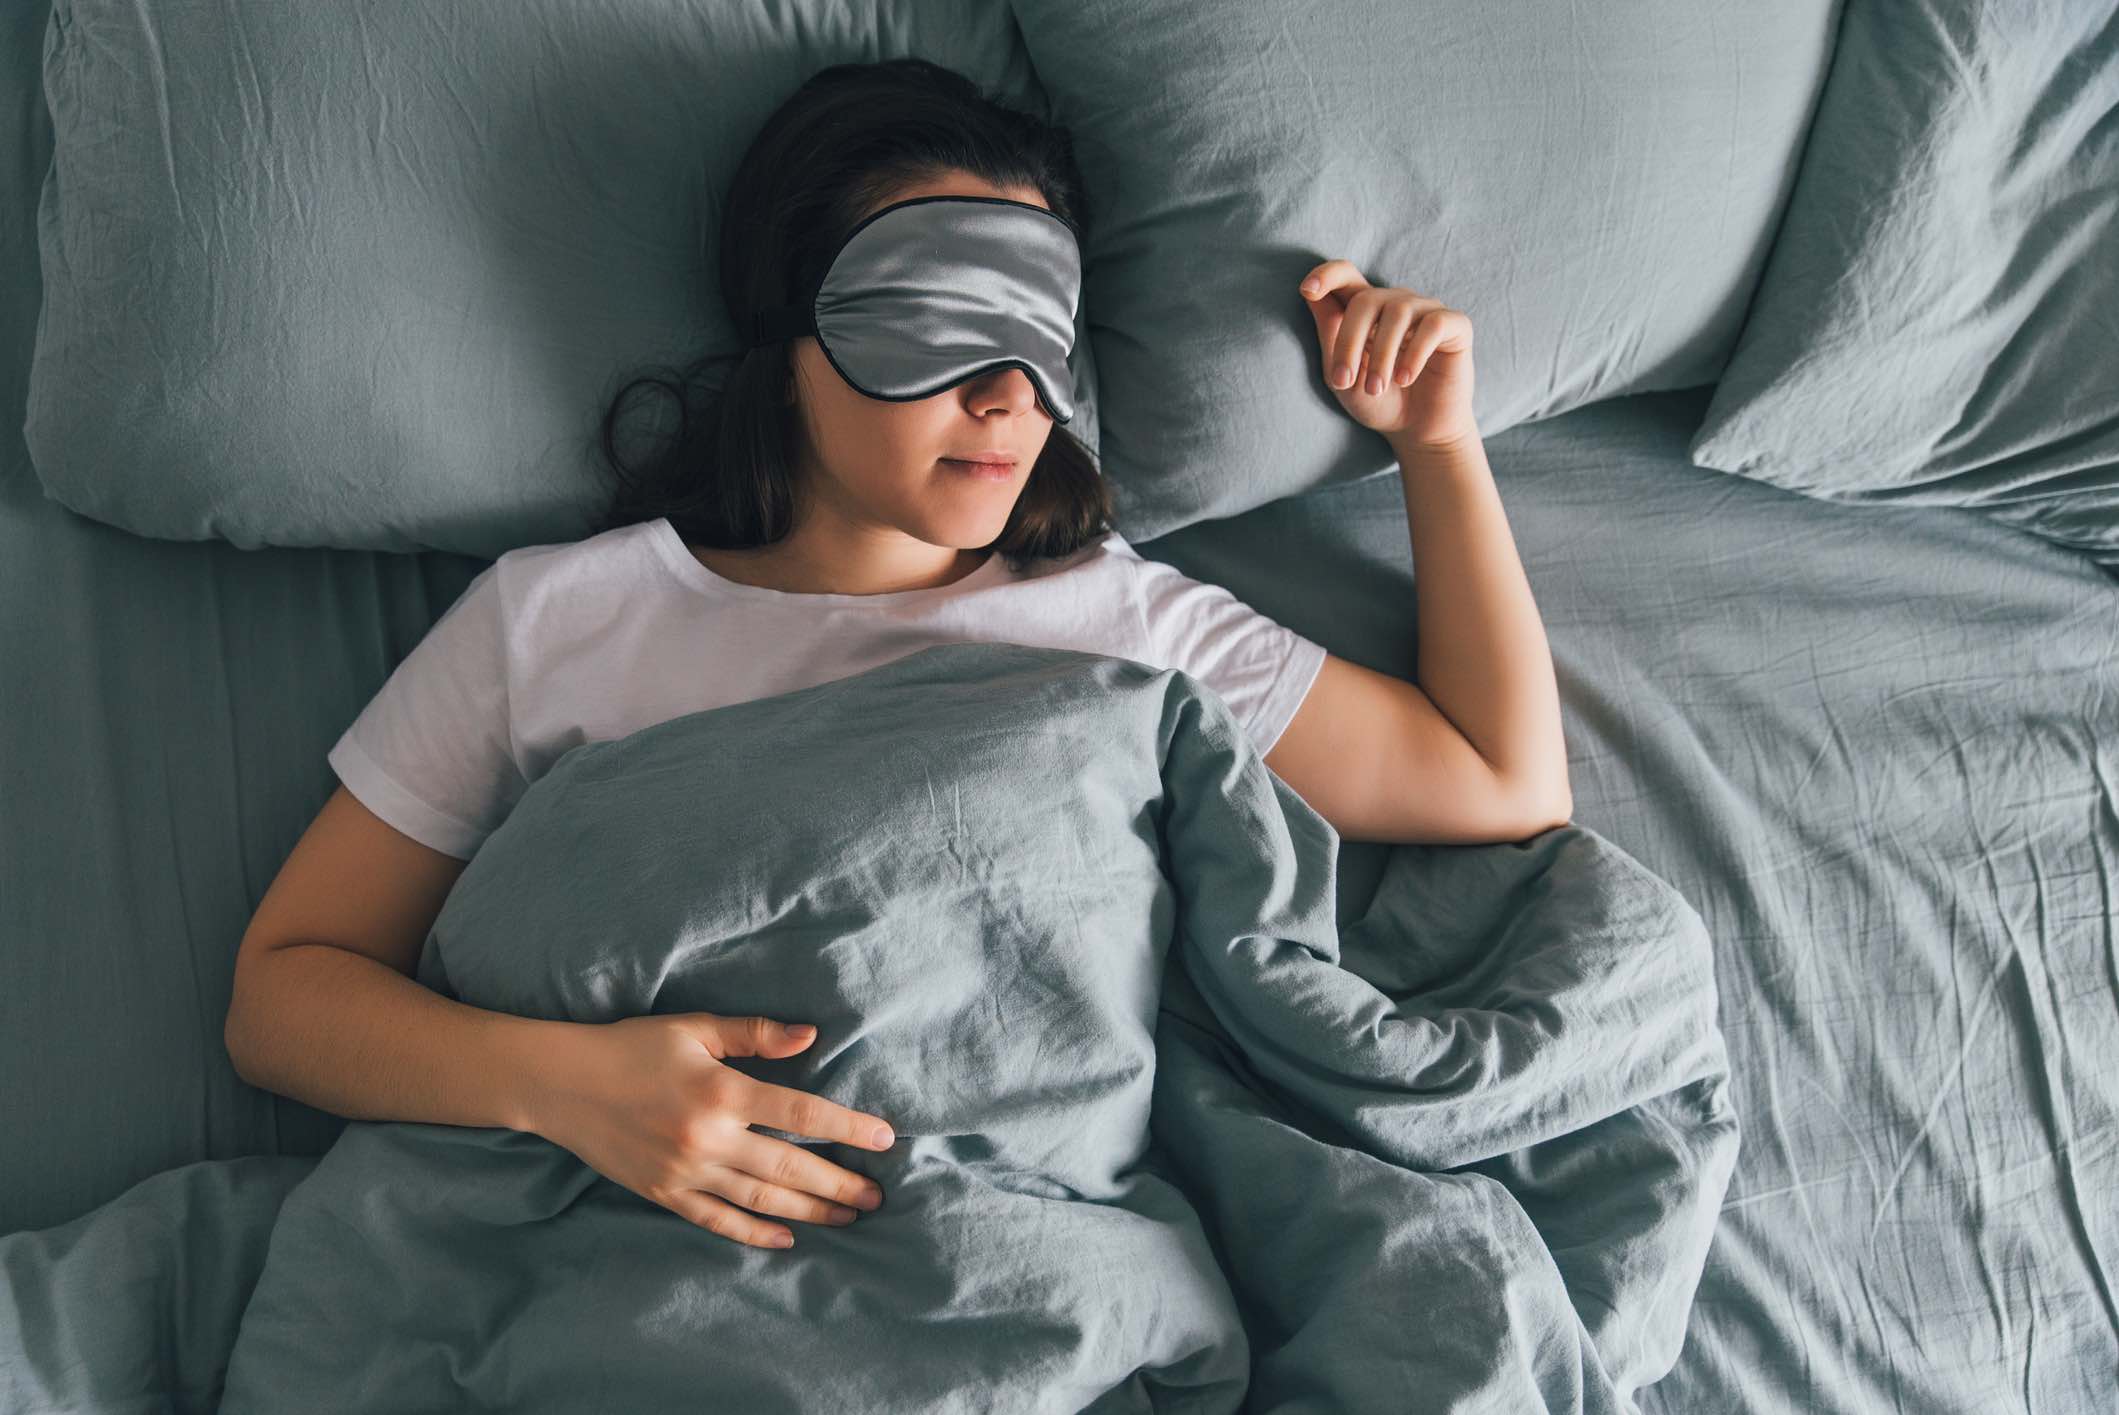 A good night sleep can be cure to lot of health issues: Pulmonologist Dr Bera